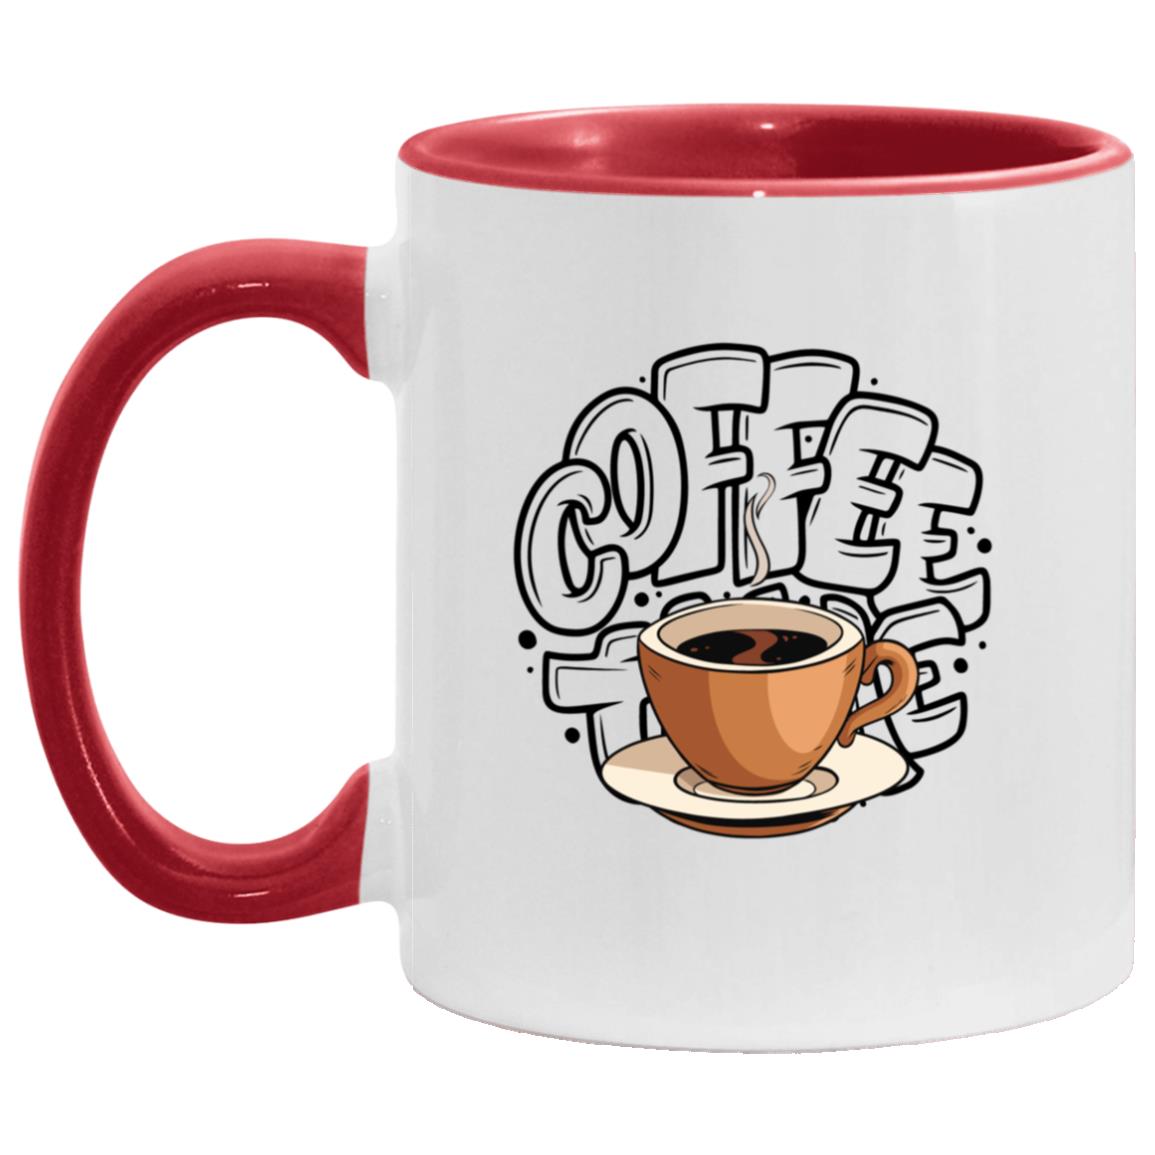 Funny Coffee Time Mug|For Mom| For Dad| For Girlfriend| For Co-Workers| For Boss| Best Friend